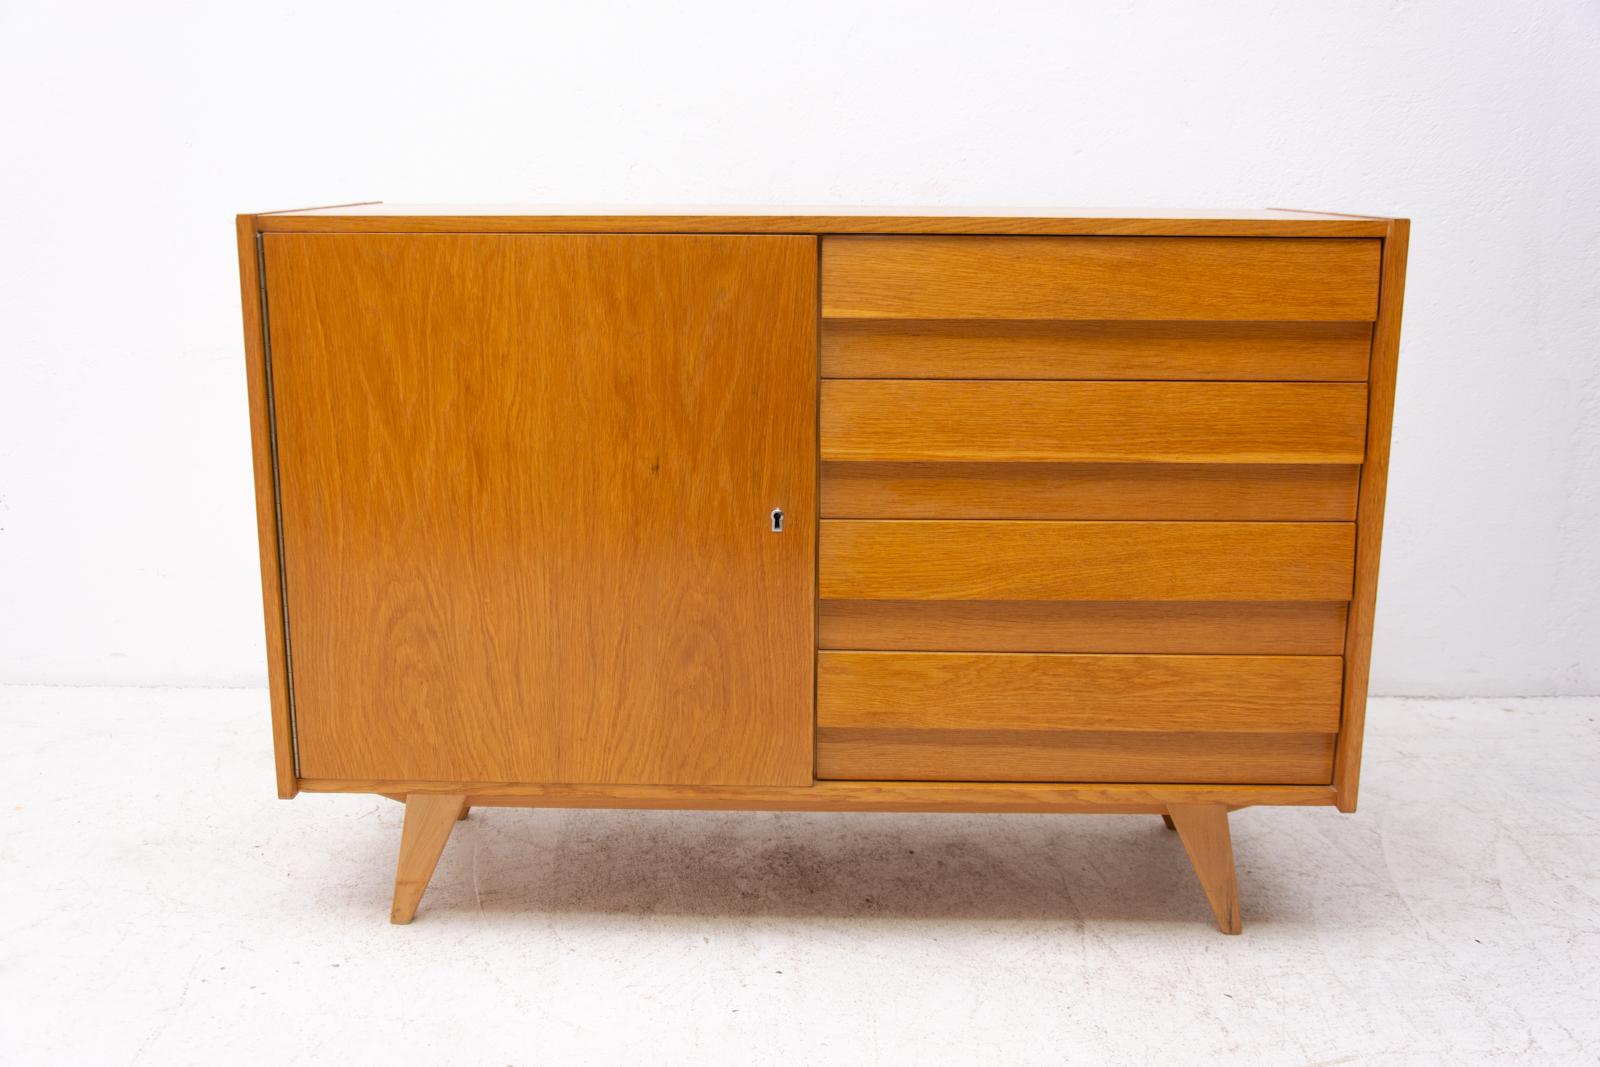 Midcentury chest of drawers, model no. U-458, designed by Jiri Jiroutek. It was made in the 1960s and produced by “Interier Praha”. This model associated with world-renowned EXPO 58-“Brussels period”. It features beechwood, plywood, veneered